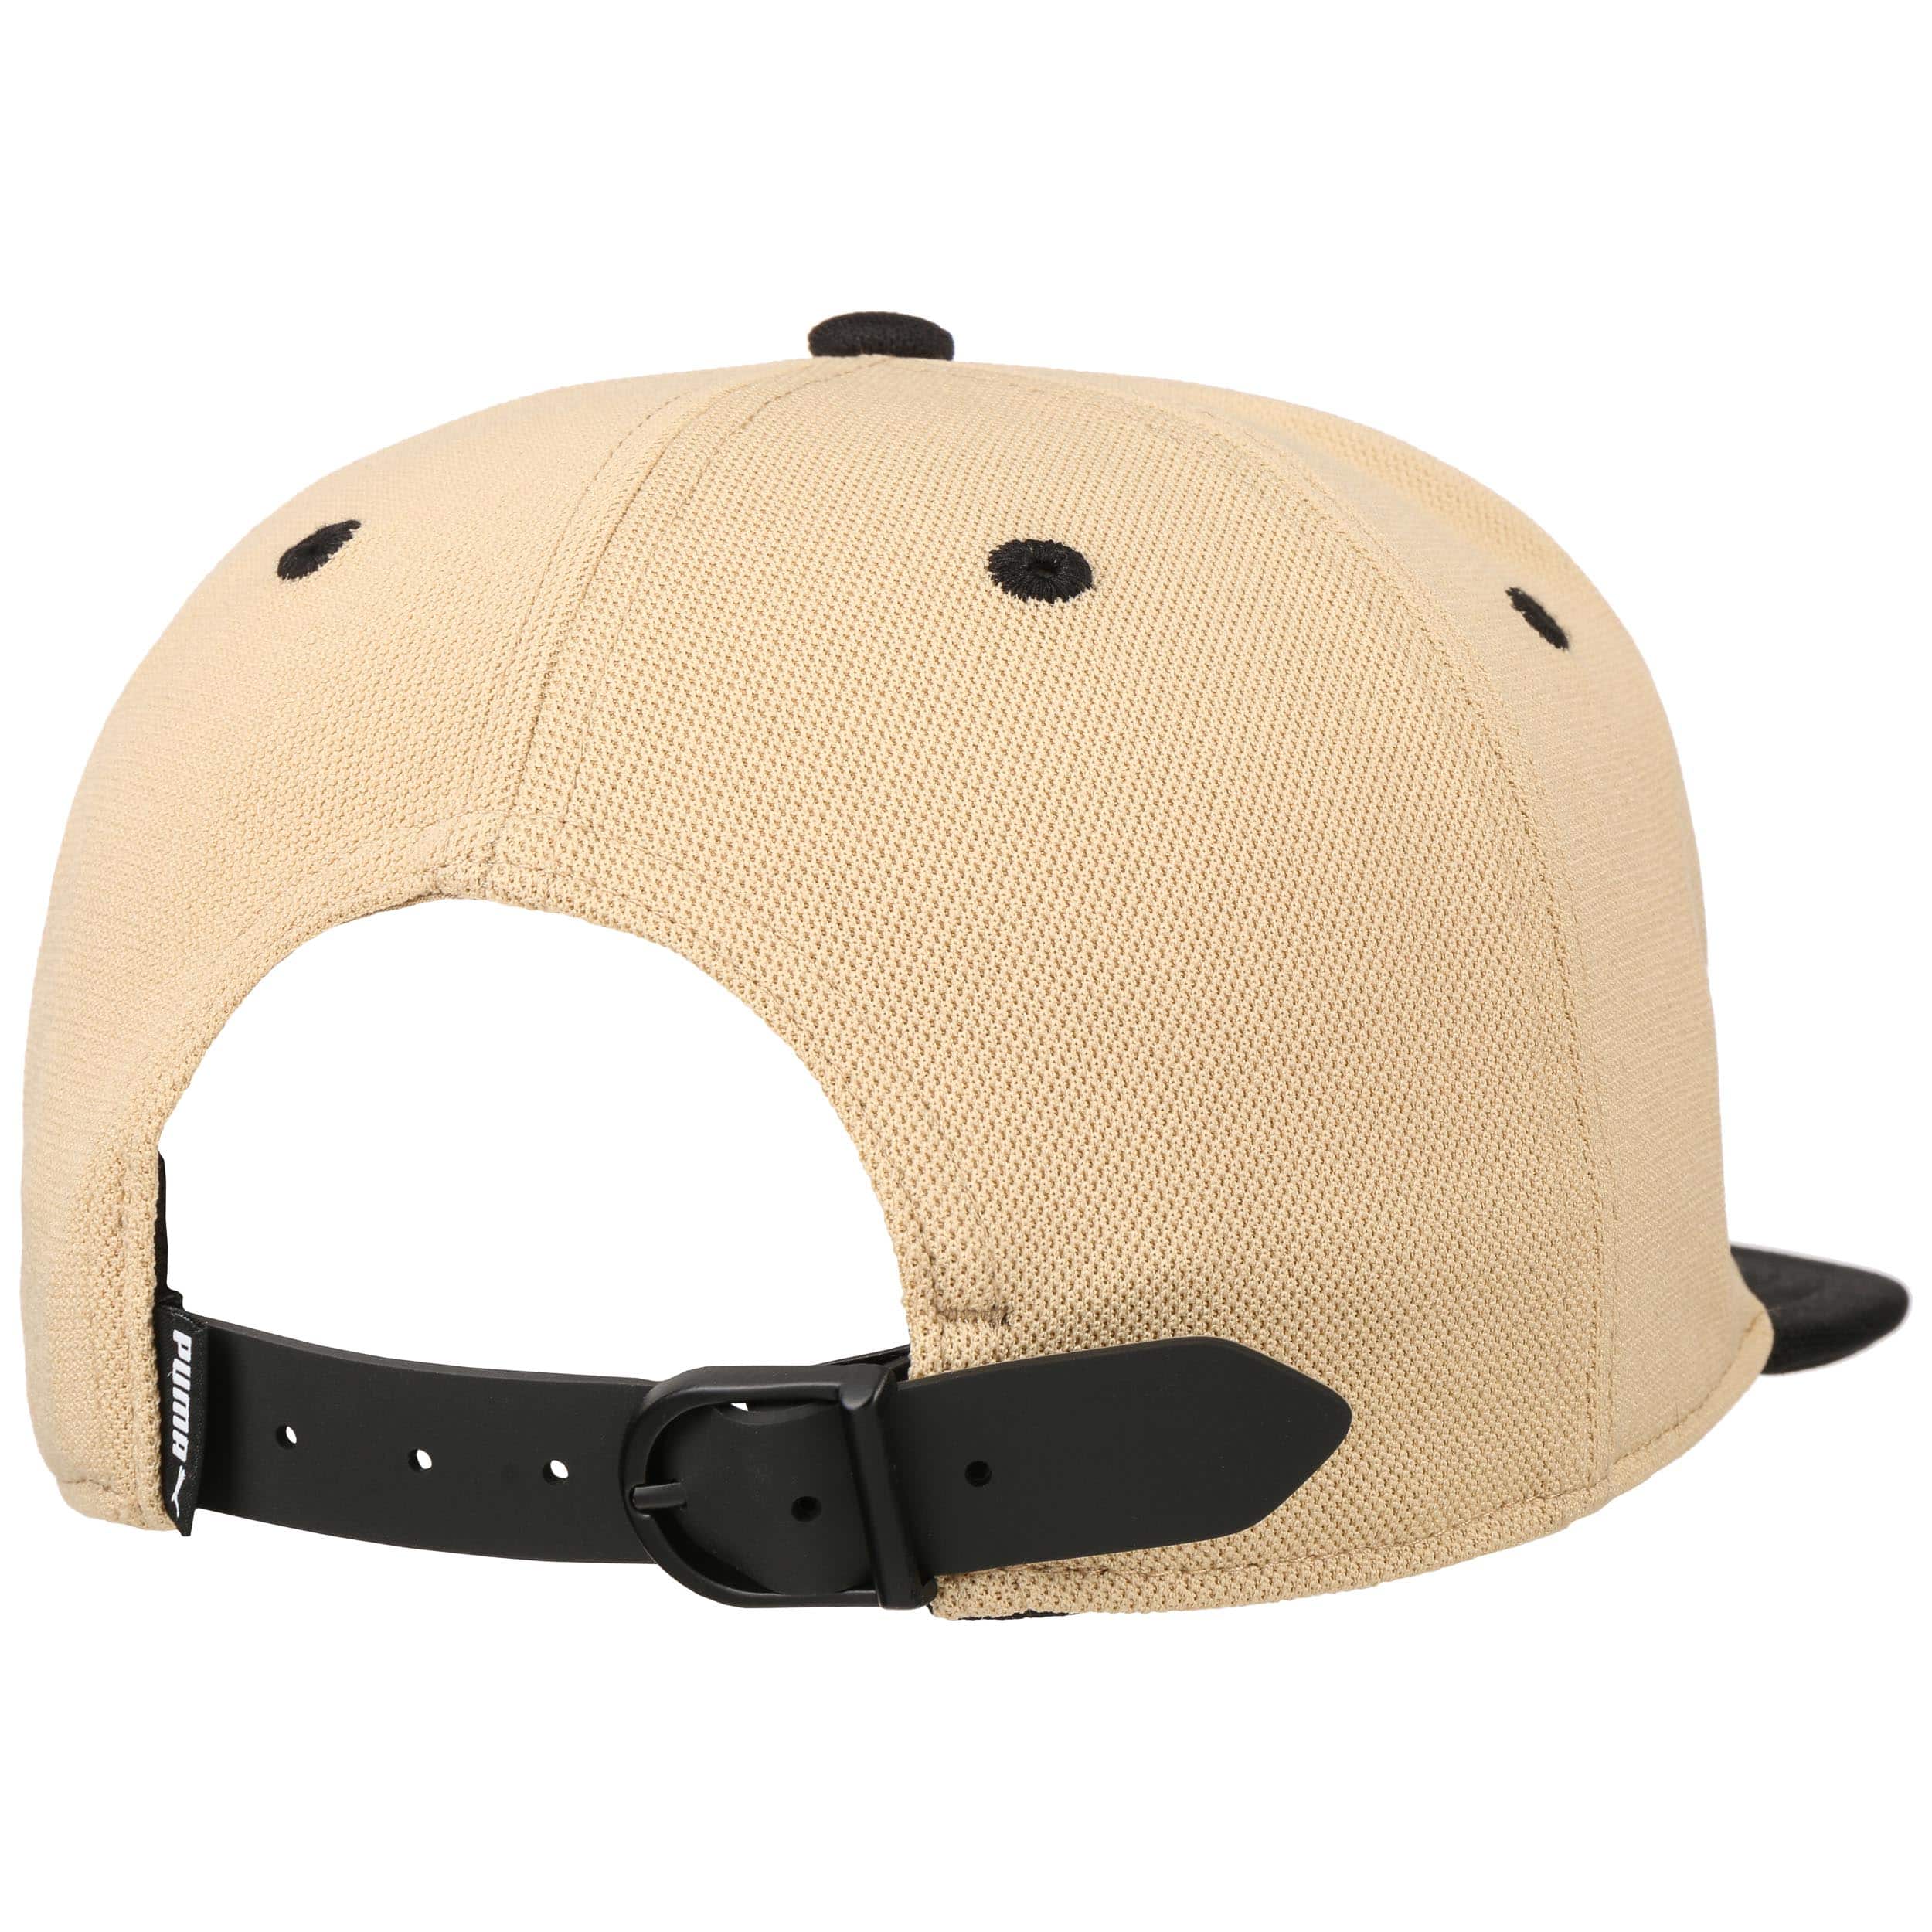 Archive Downtown FB Cap by PUMA - 25,95 €